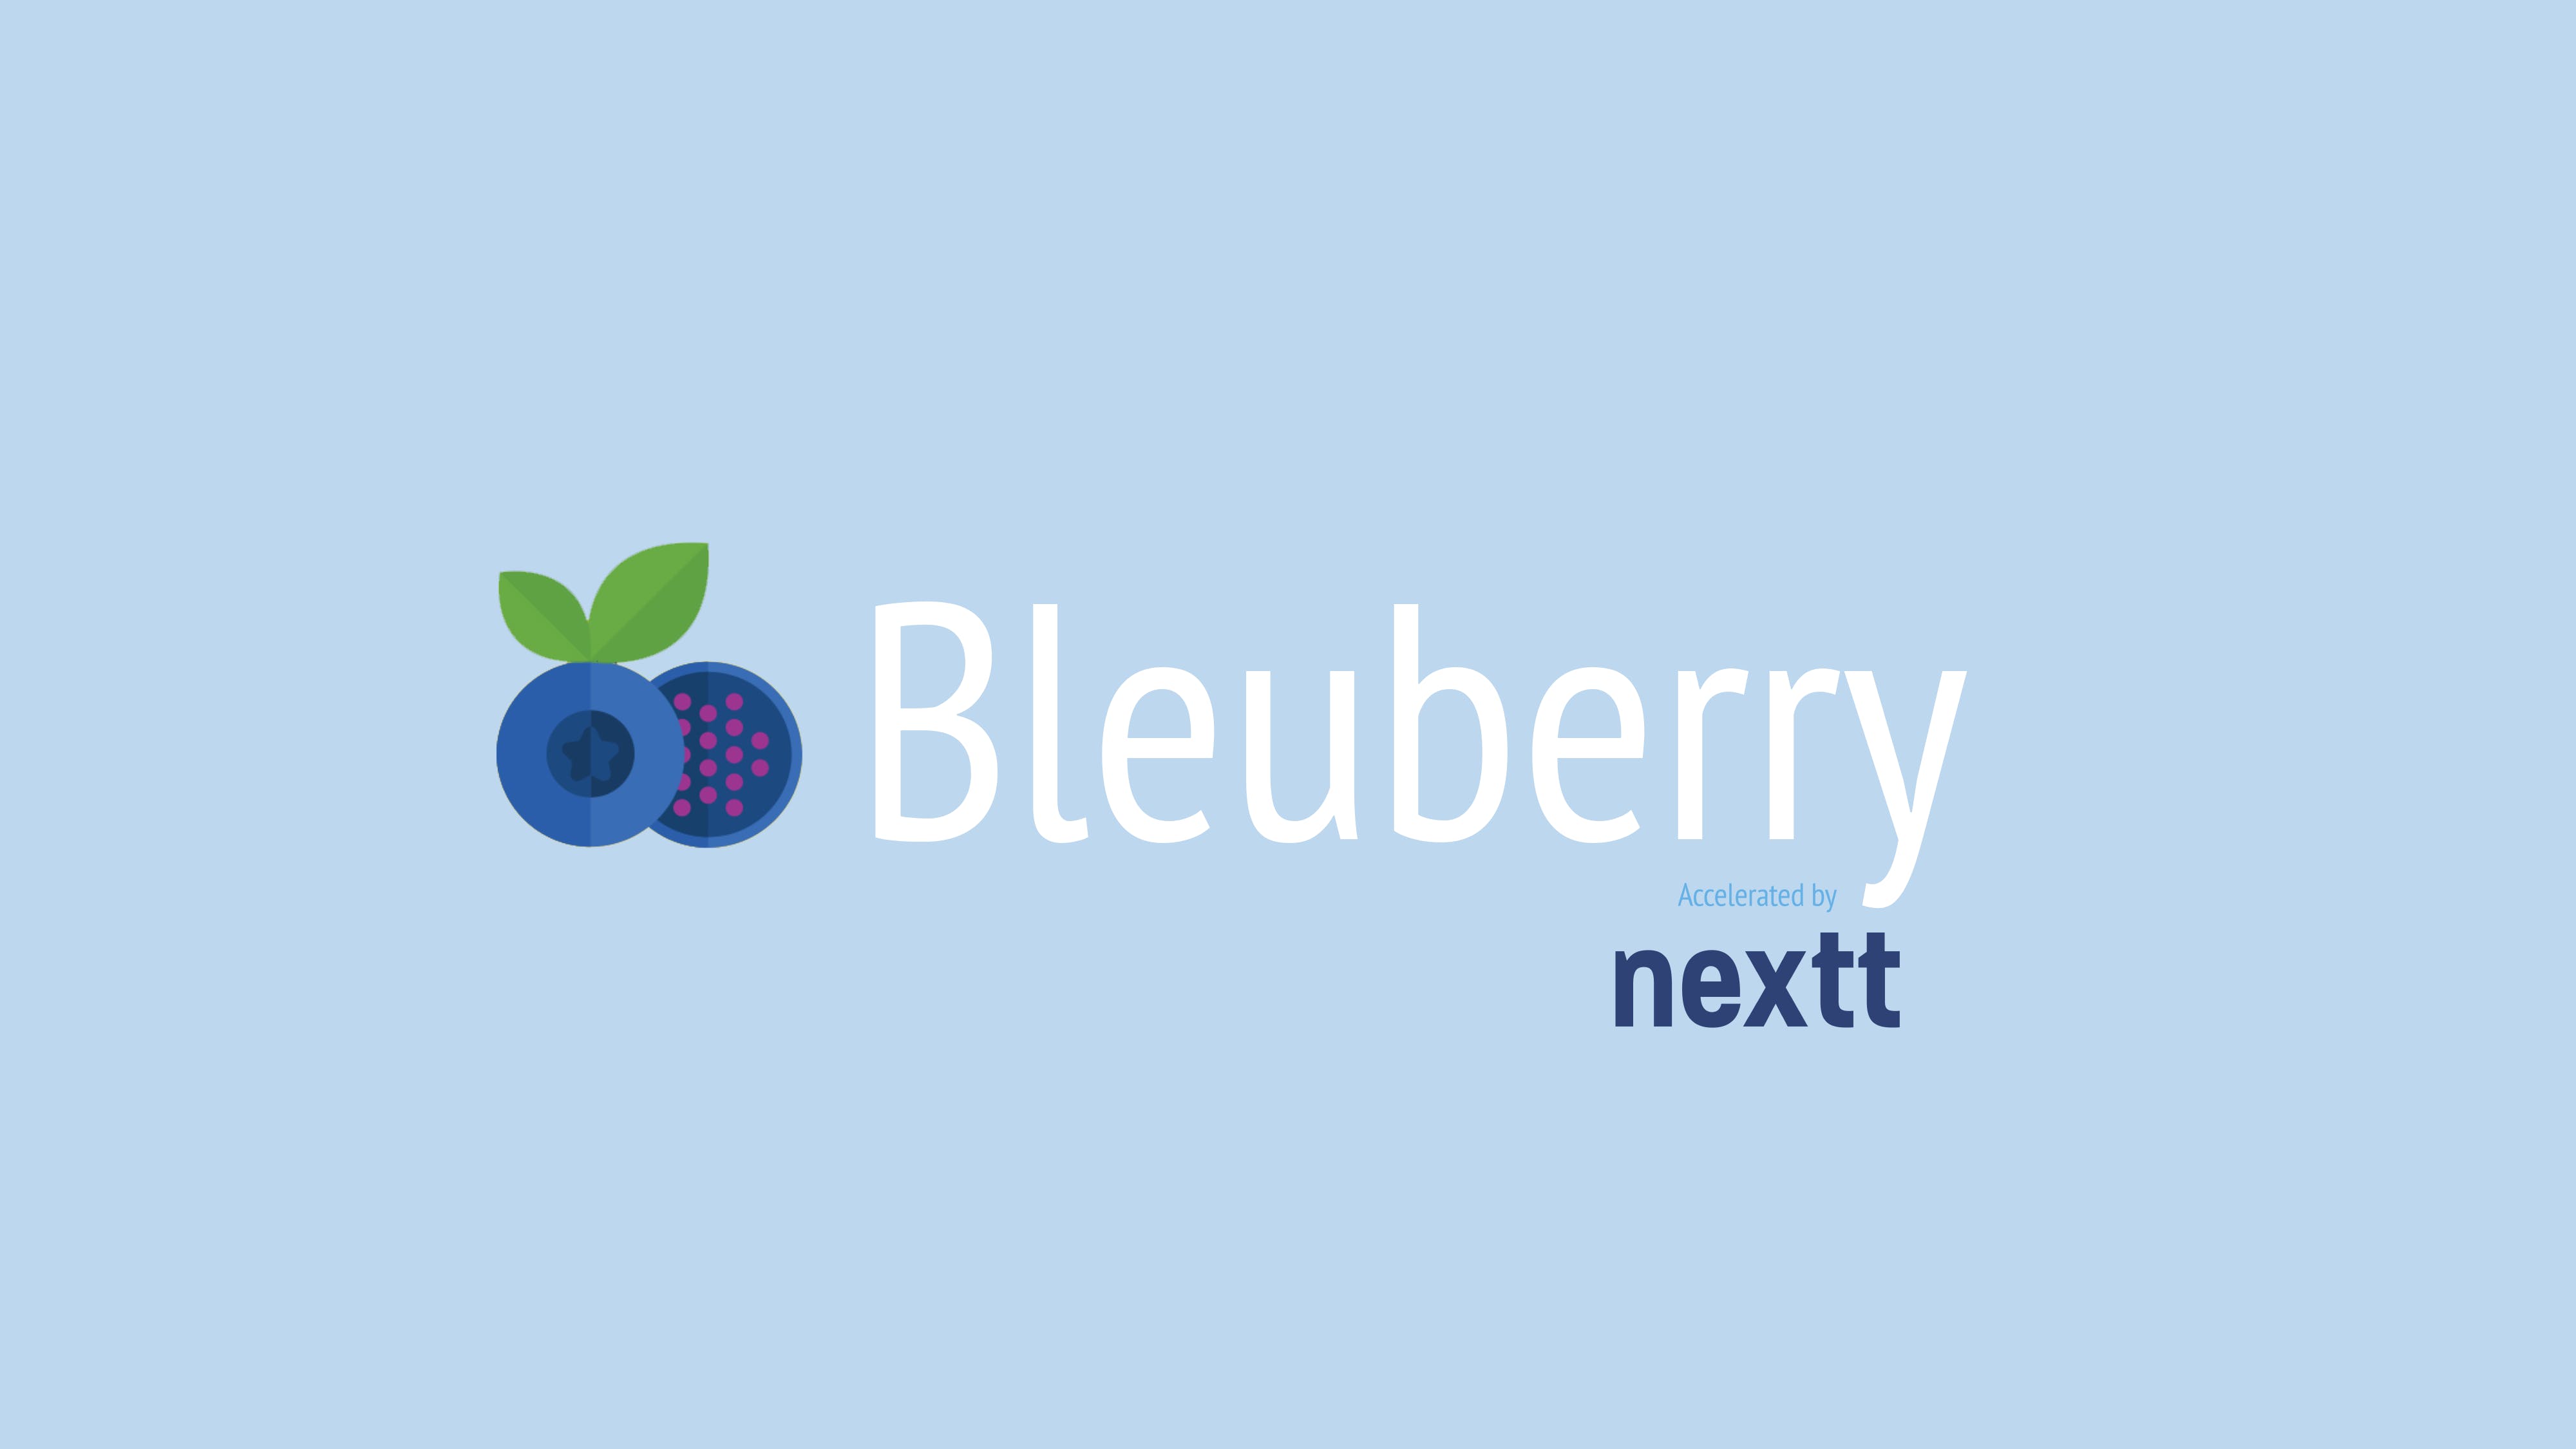 The Bleuberry Project media 2